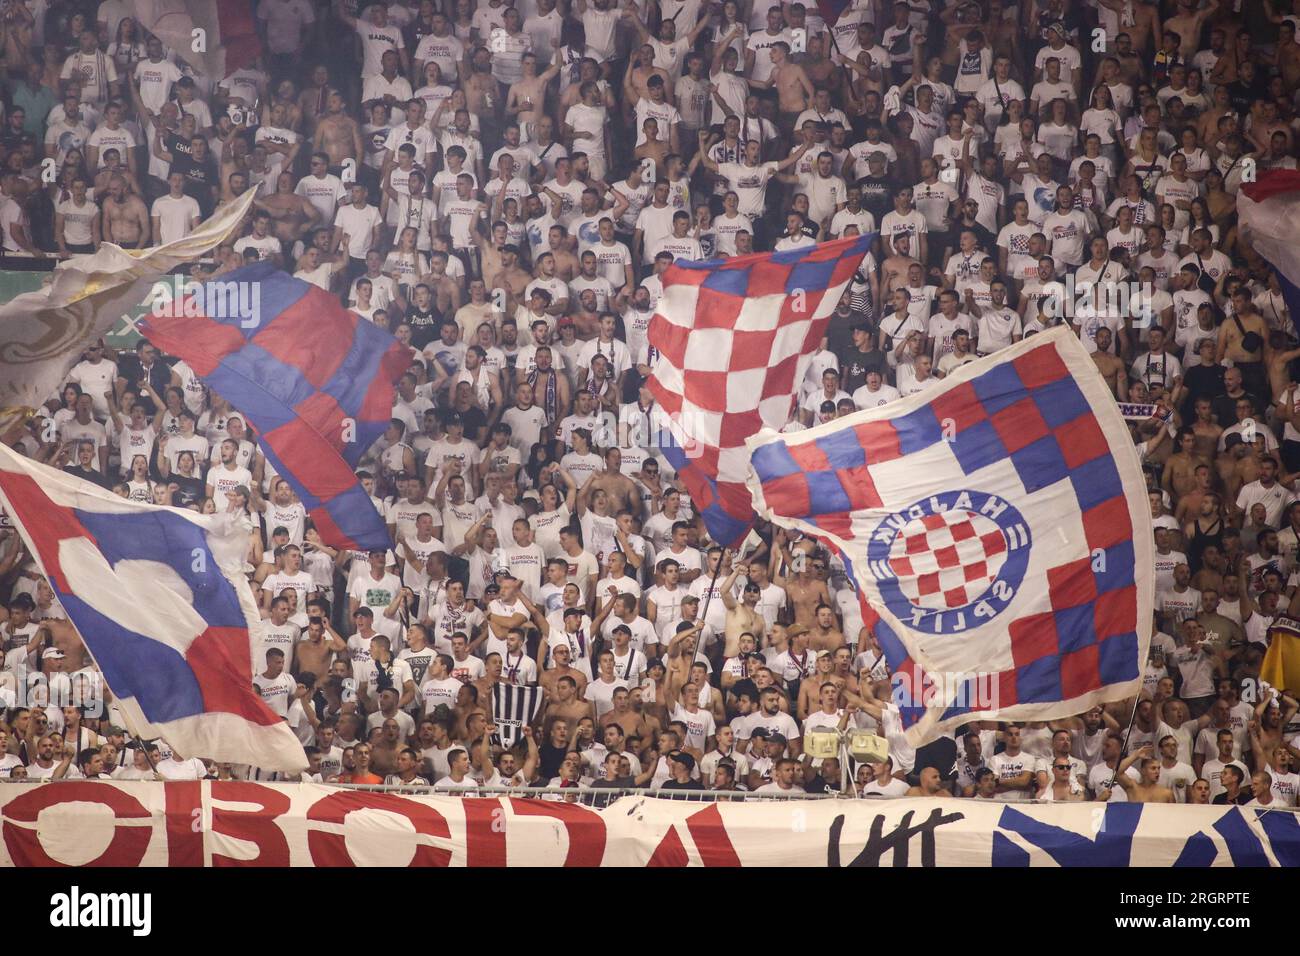 Hajduk Split - Museum and Stadium Tour - Only By Land